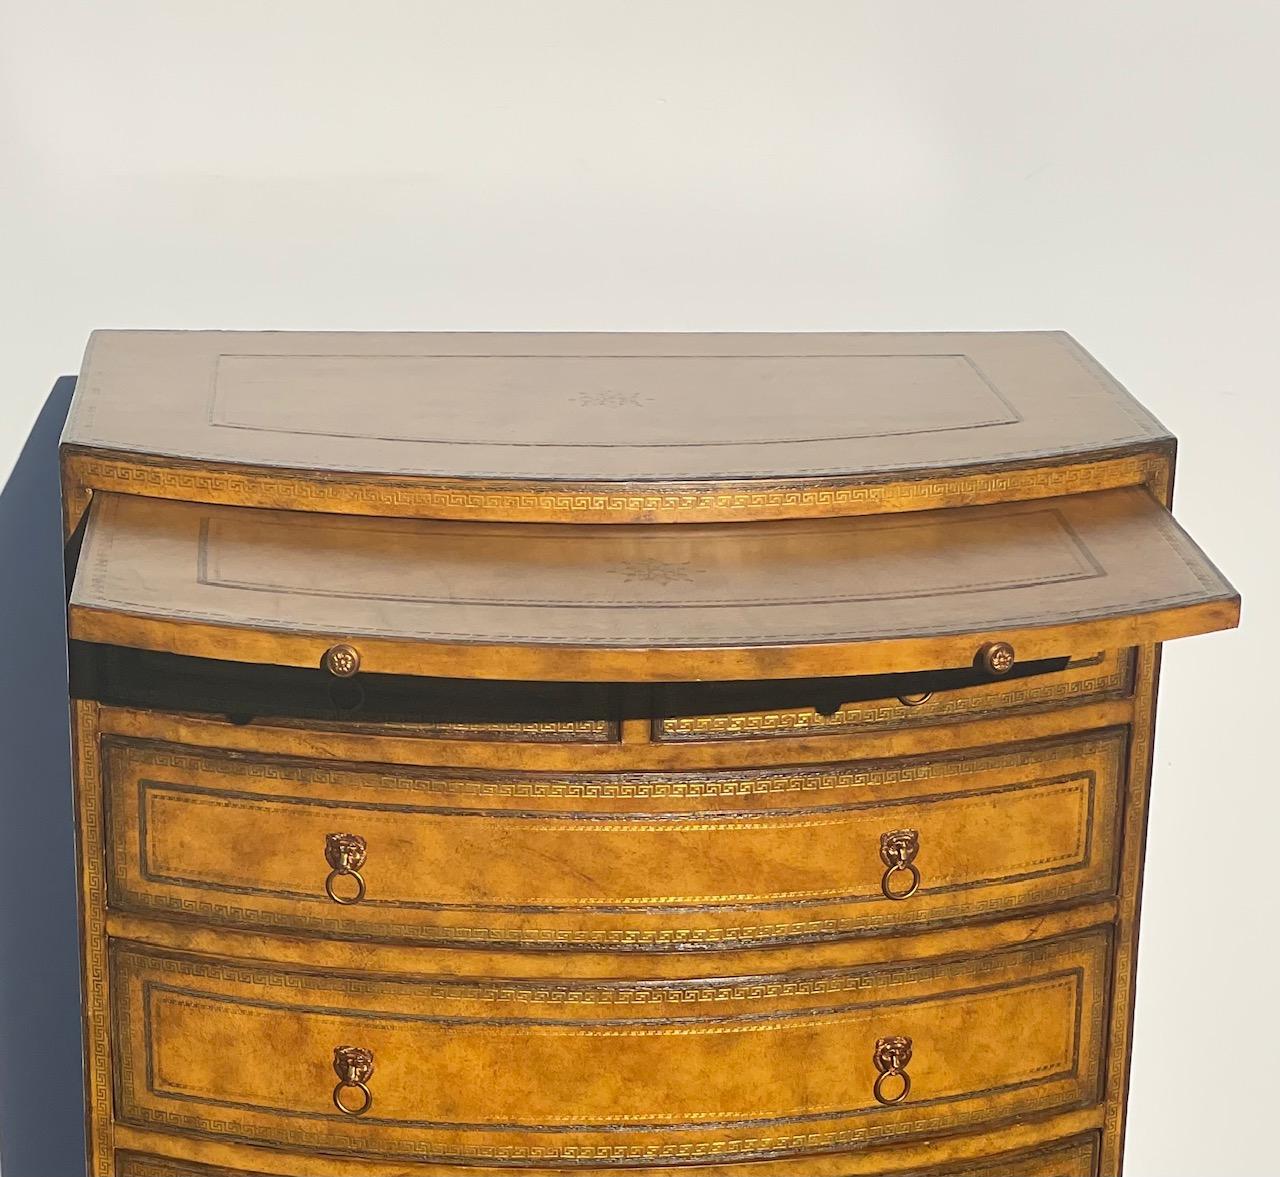 Philippine Luxurious Tooled Leather Wrapped Bachelors Chest Commode with Lion Hardware